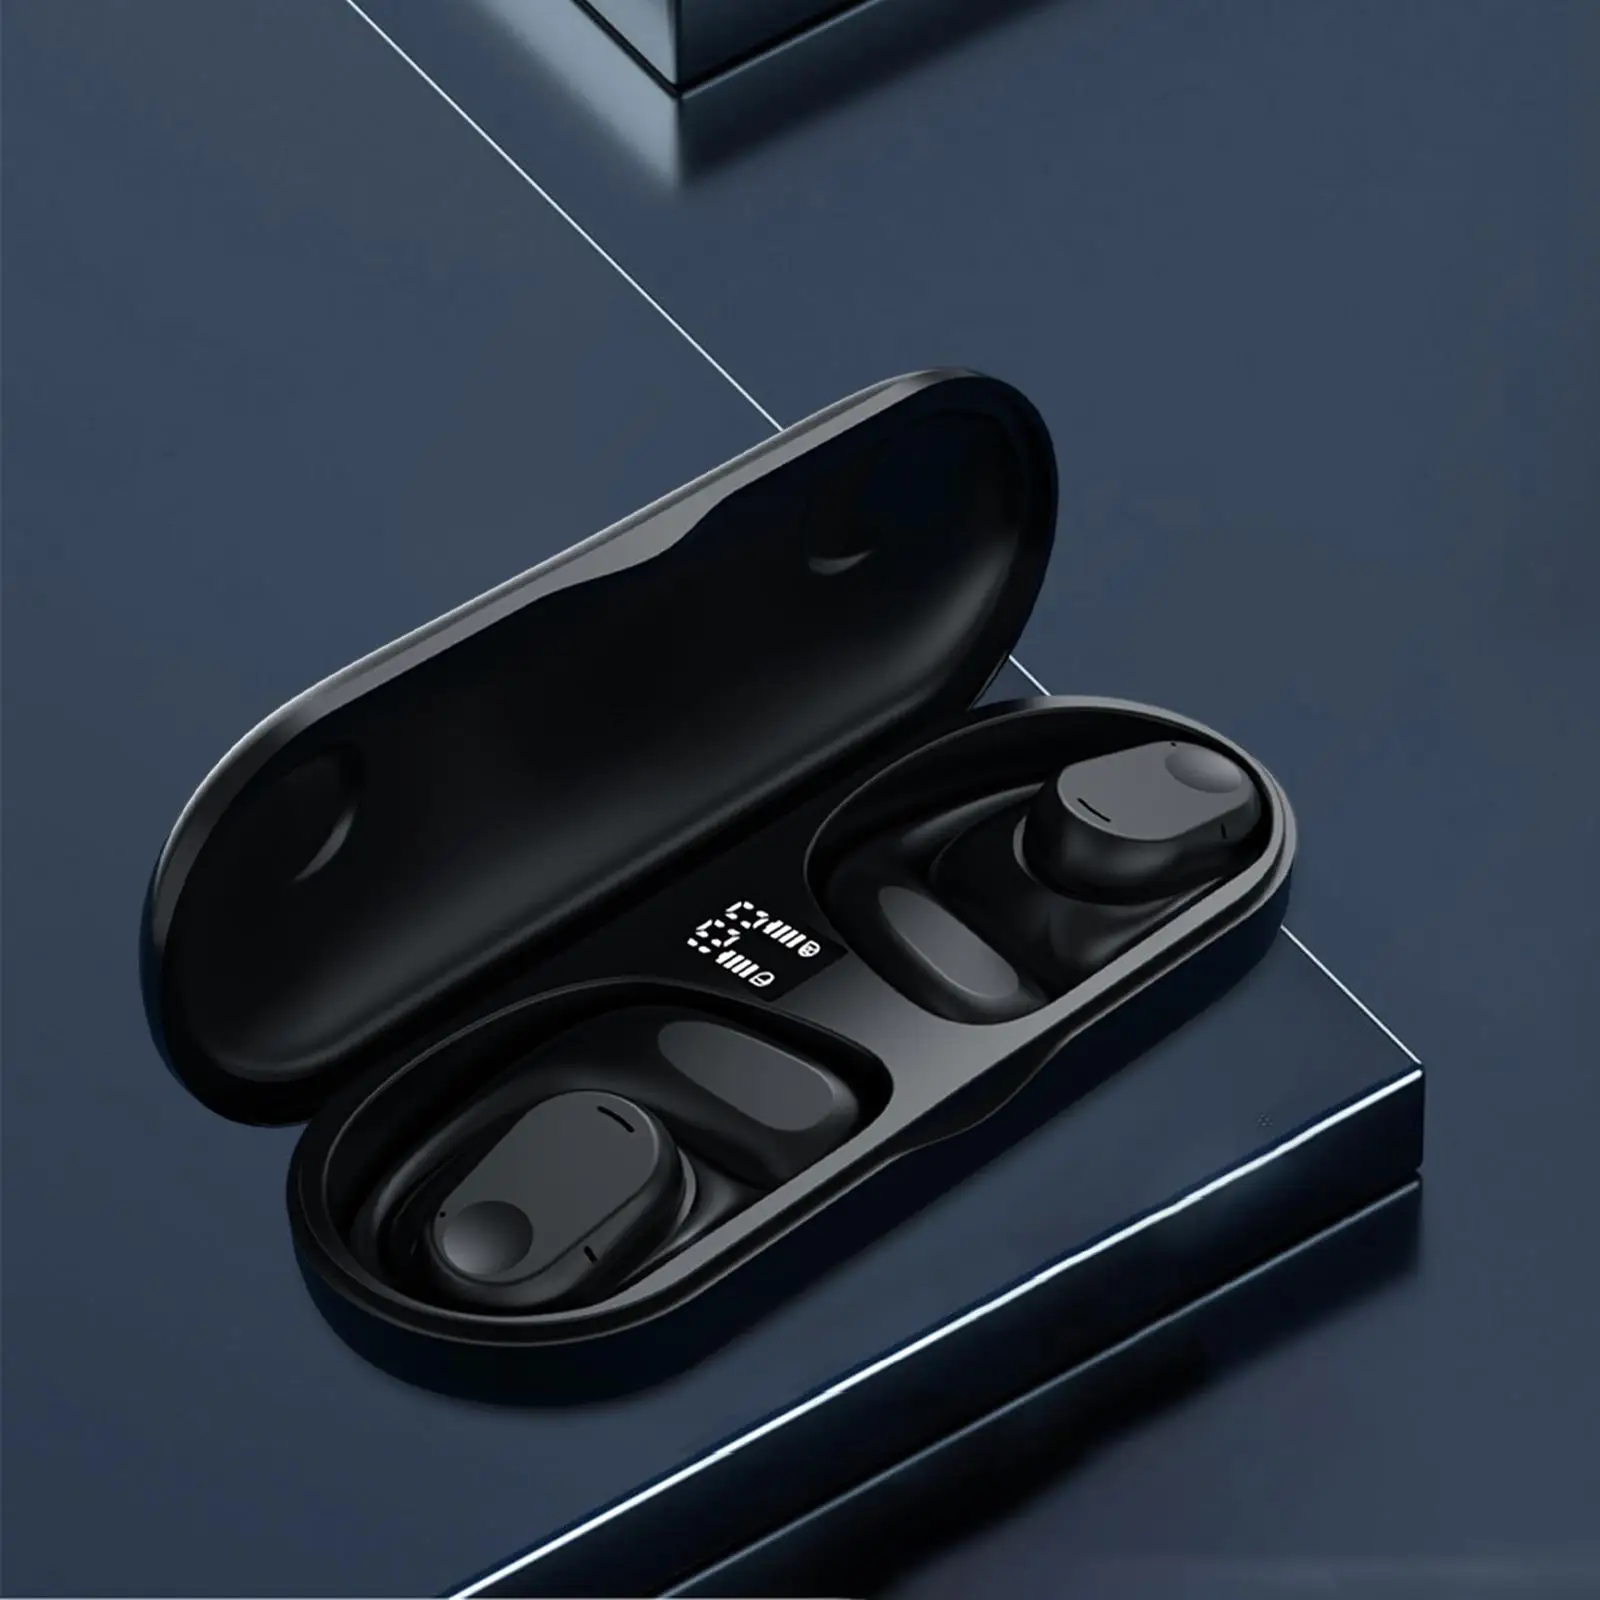 V5.3 Wireless Earphones Built in Microphone Low Latency Hands Free Ear Clip Design Headphones for Running Fitness Sports Office